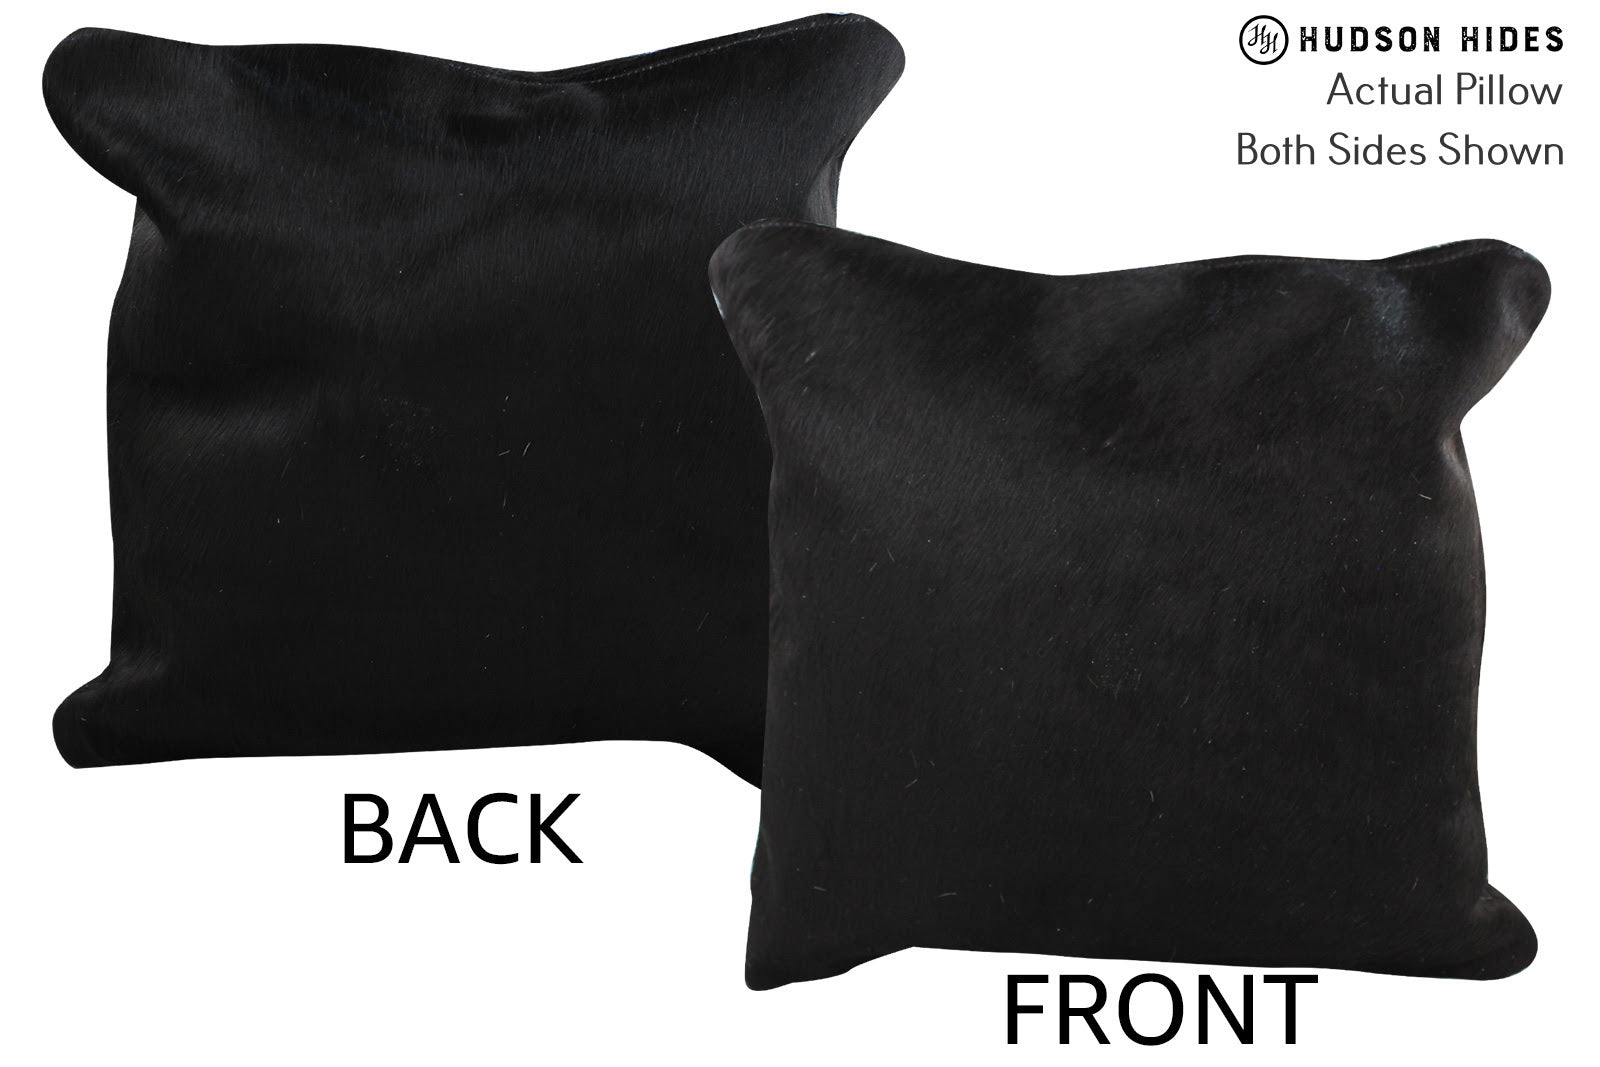 Solid Black Cowhide Pillow #74168